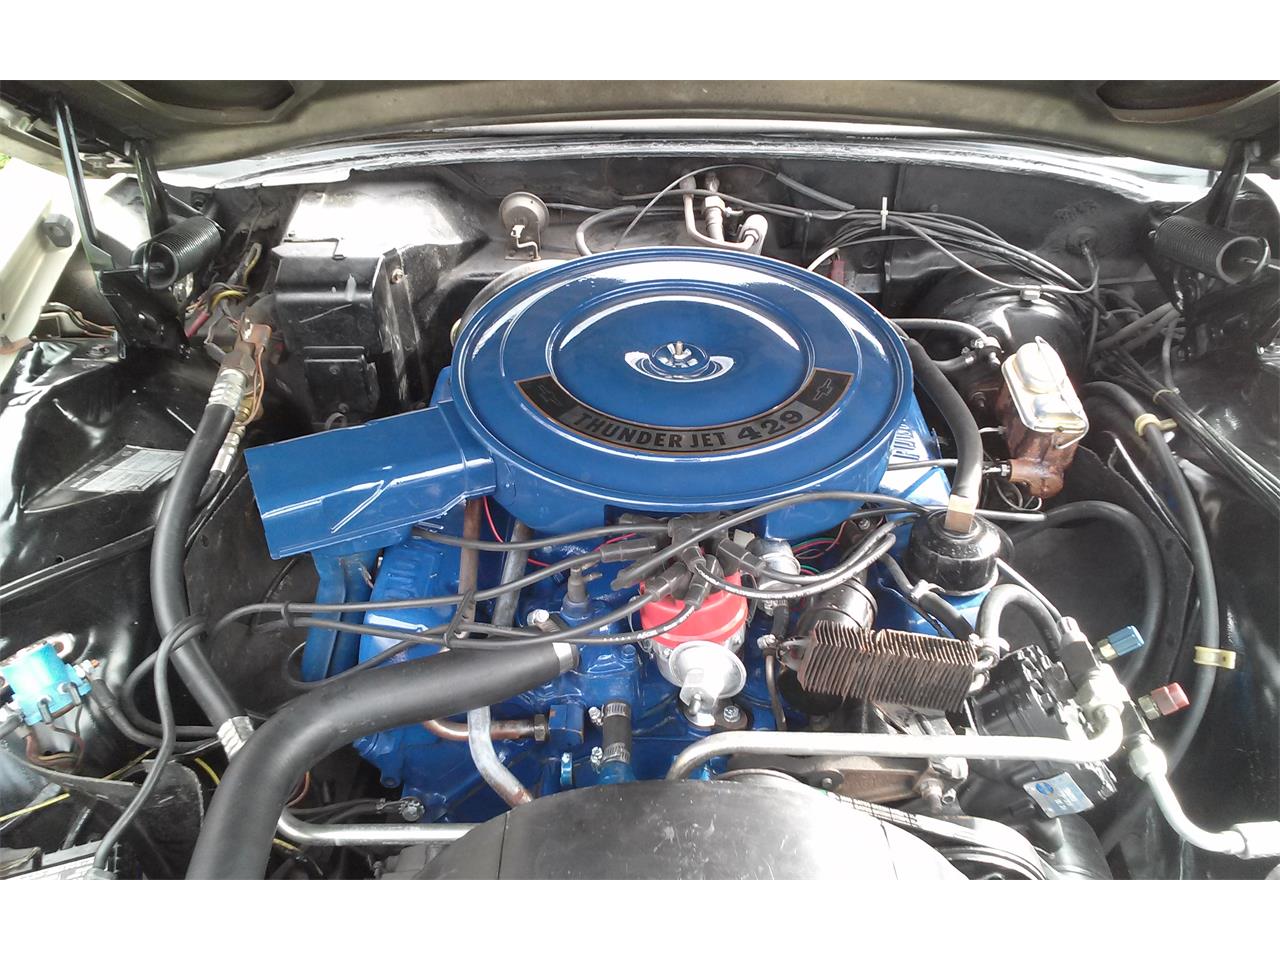 1968 Ford Thunderbird for sale in Rockville, MD ...